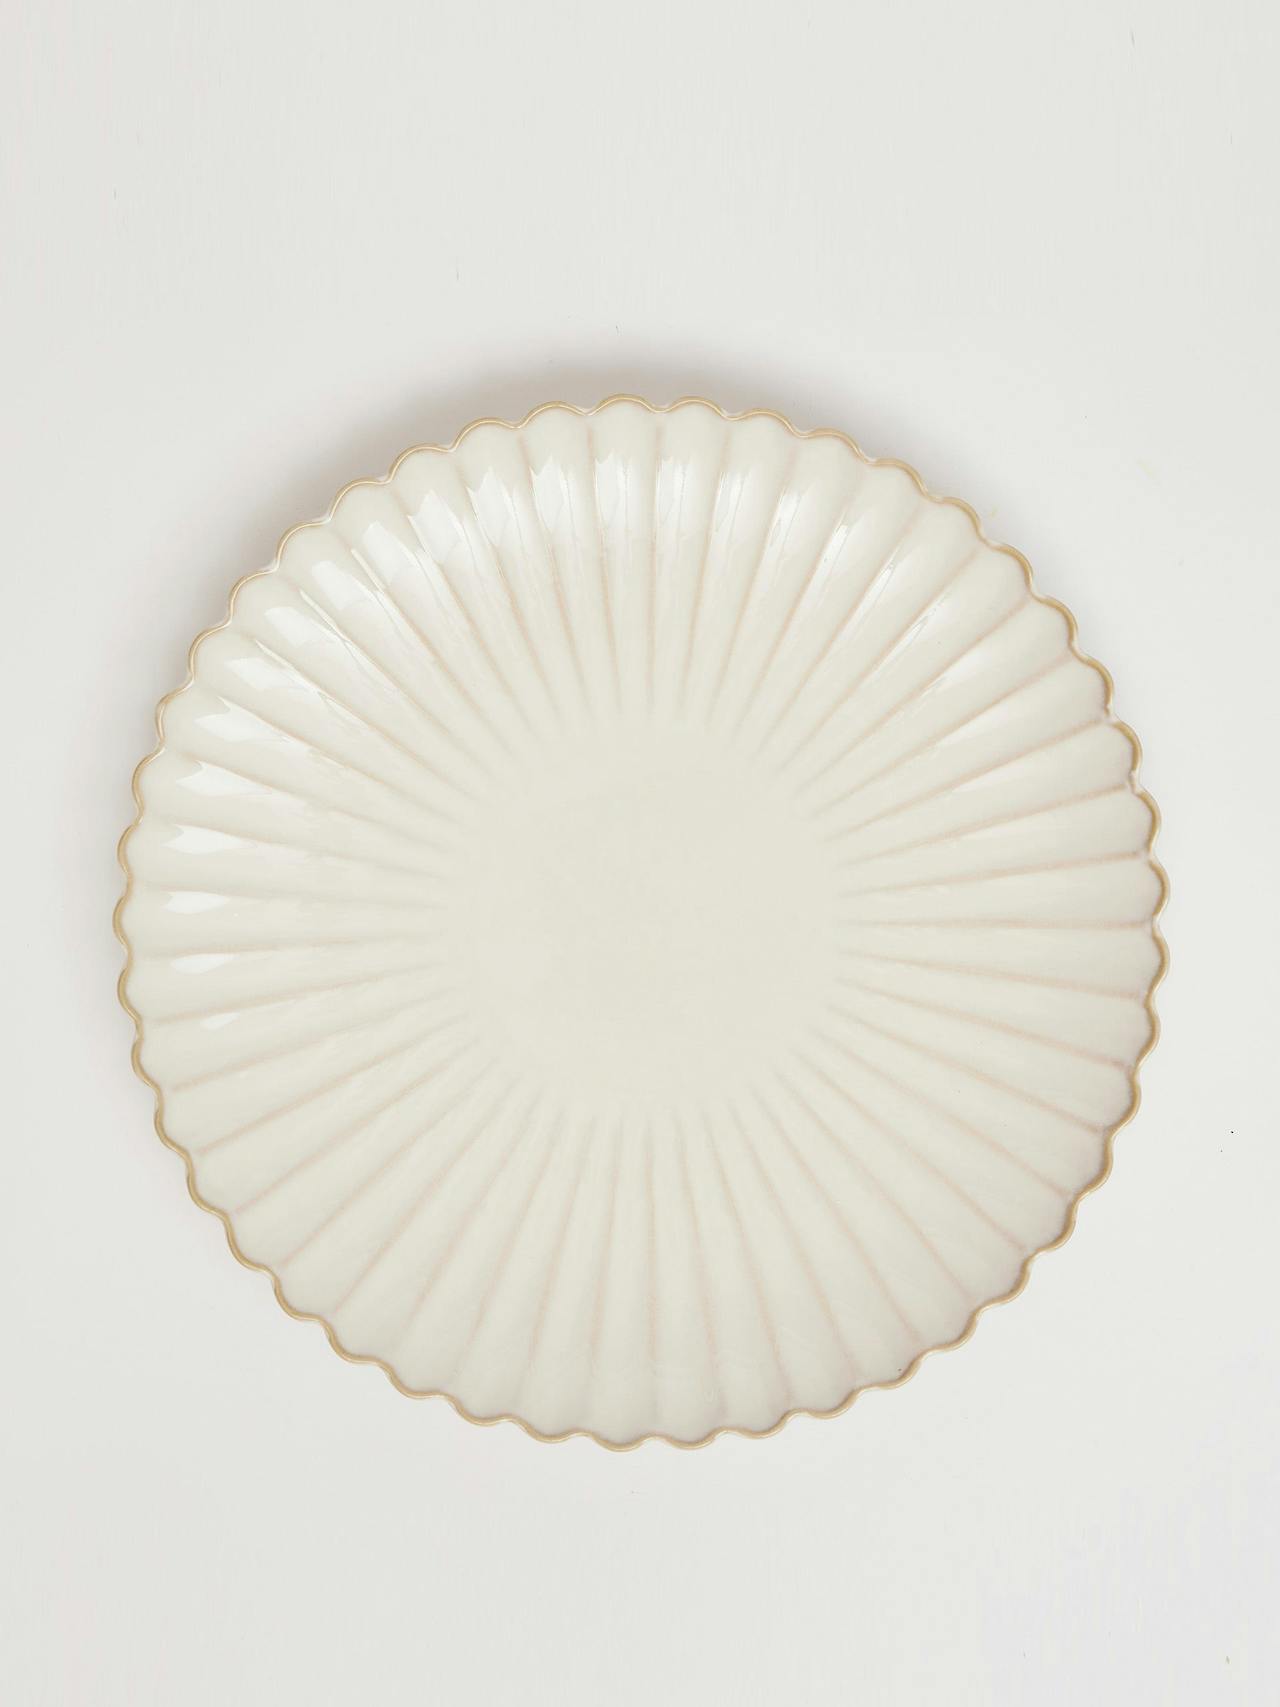 Scallop dinner plates, set of 4